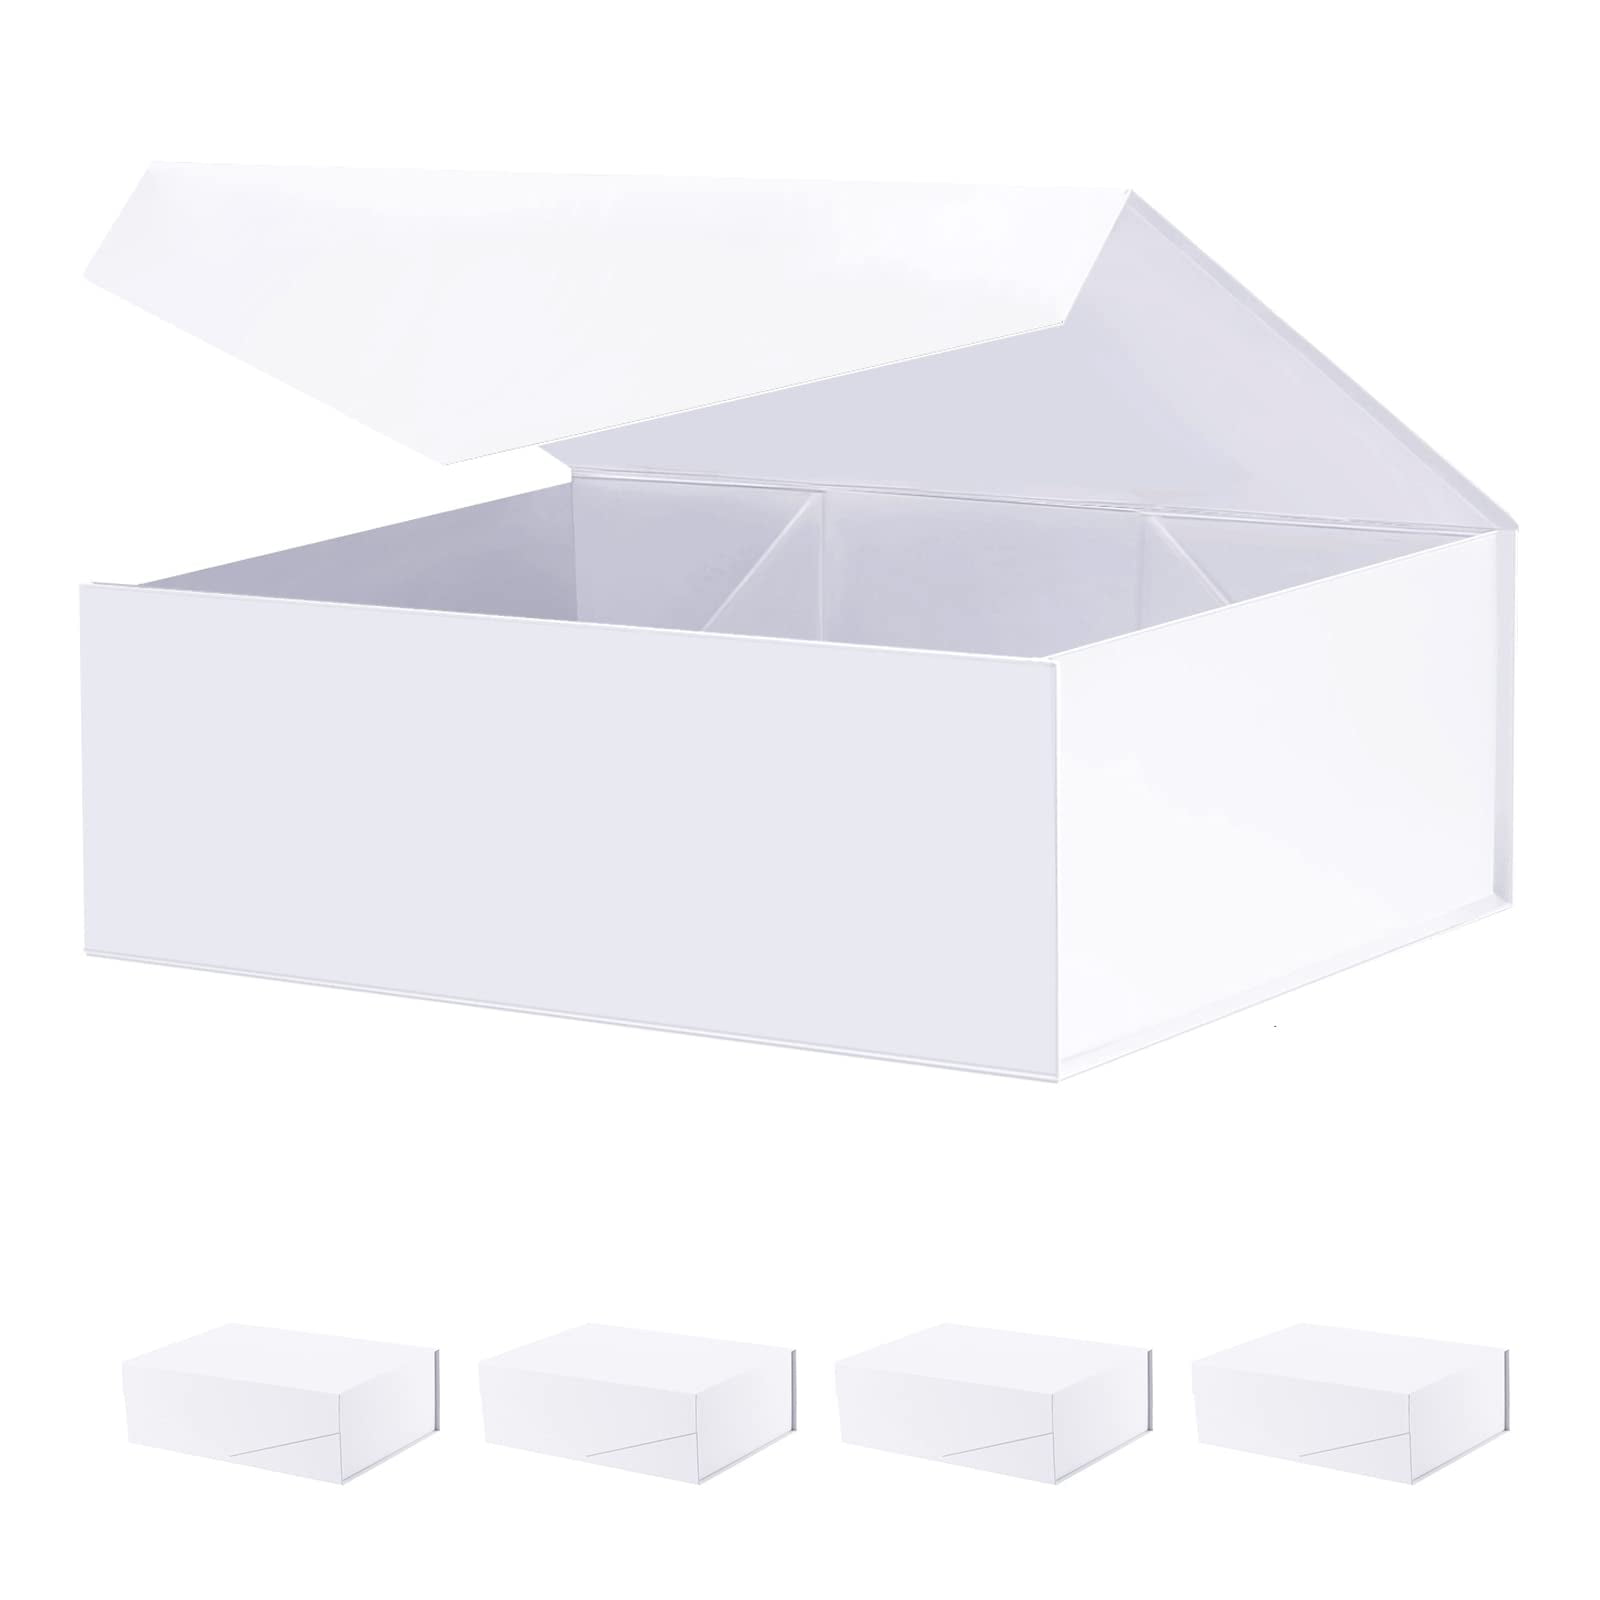 PACKHOME 5 Gift Boxes 13x9.7x3.4 Inches, Large Gift Boxes with Lids, Sturdy  Shirt Boxes with Magnetic Lids for Wrapping Gifts (Glossy Metallic White)